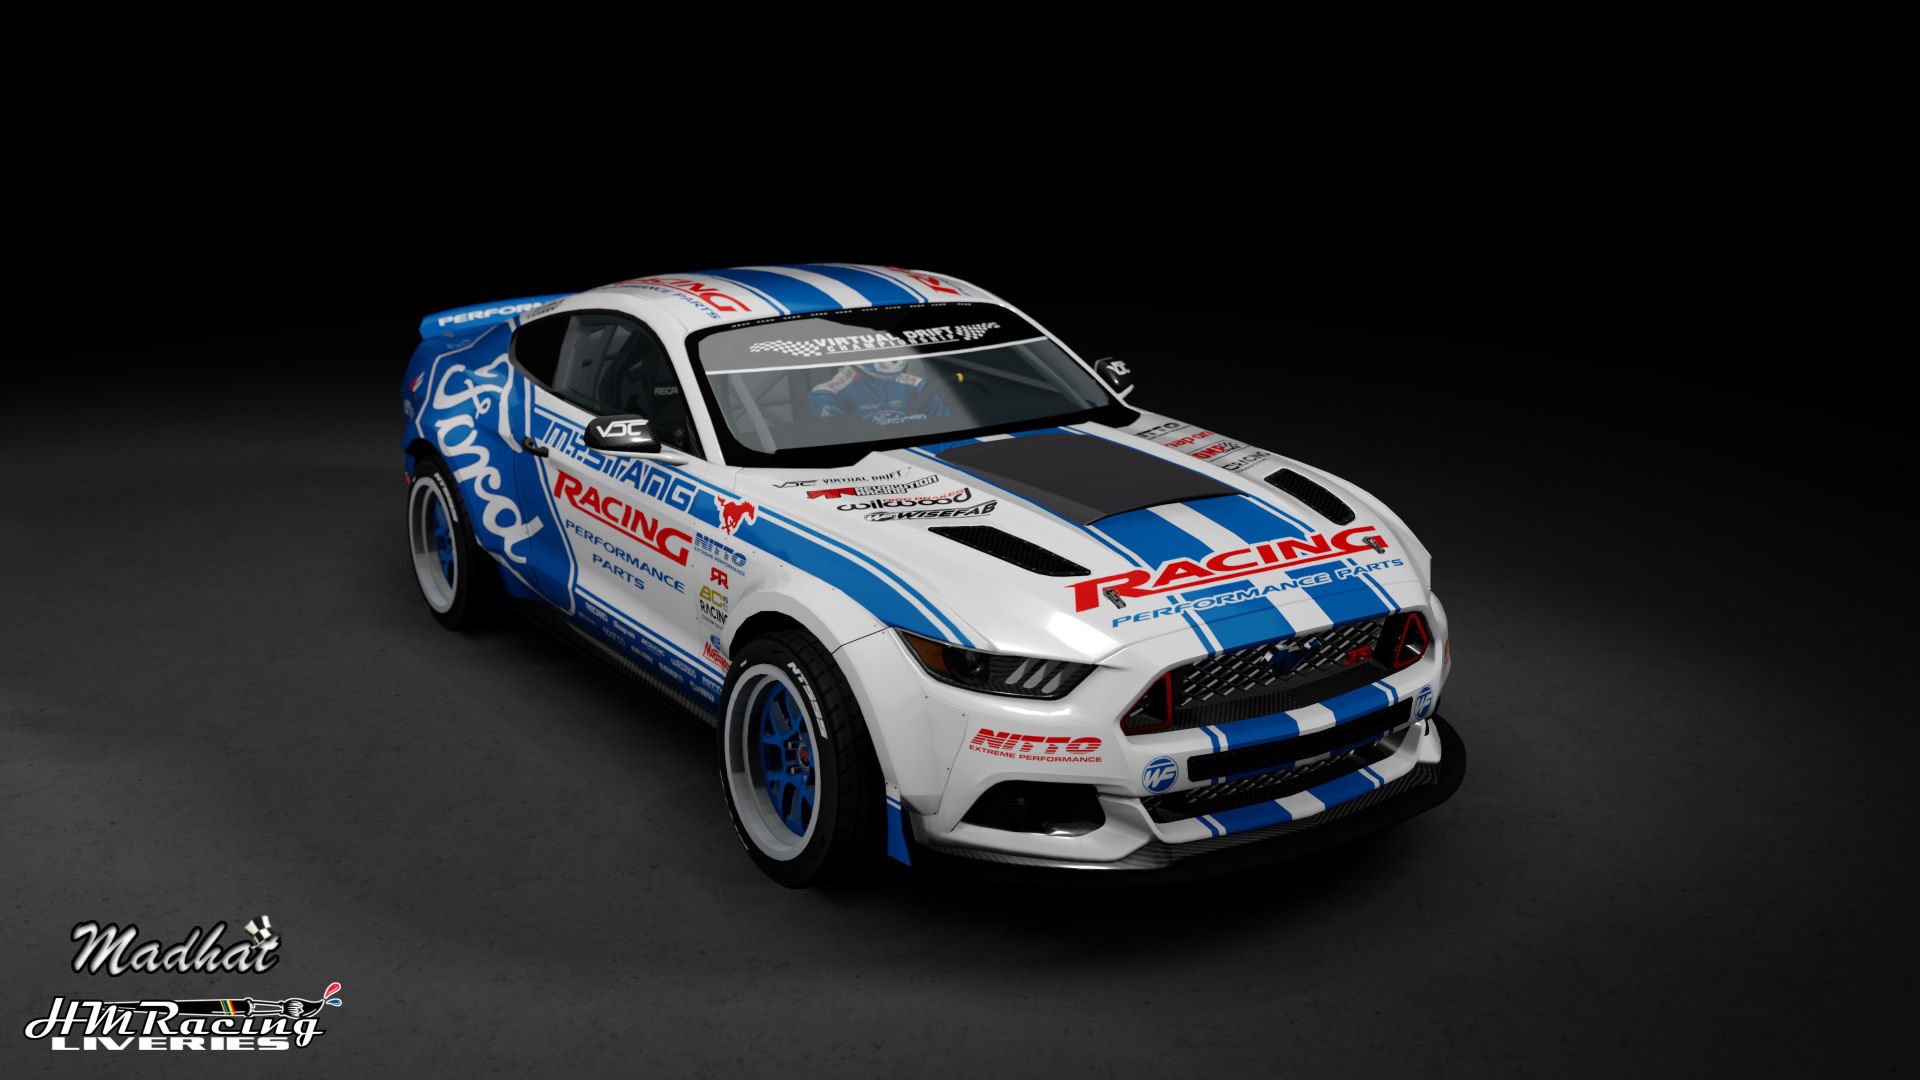 Ford Racing Performance Parts VDC RTR Mustang Madhat HMRacing Liveries 01.jpg